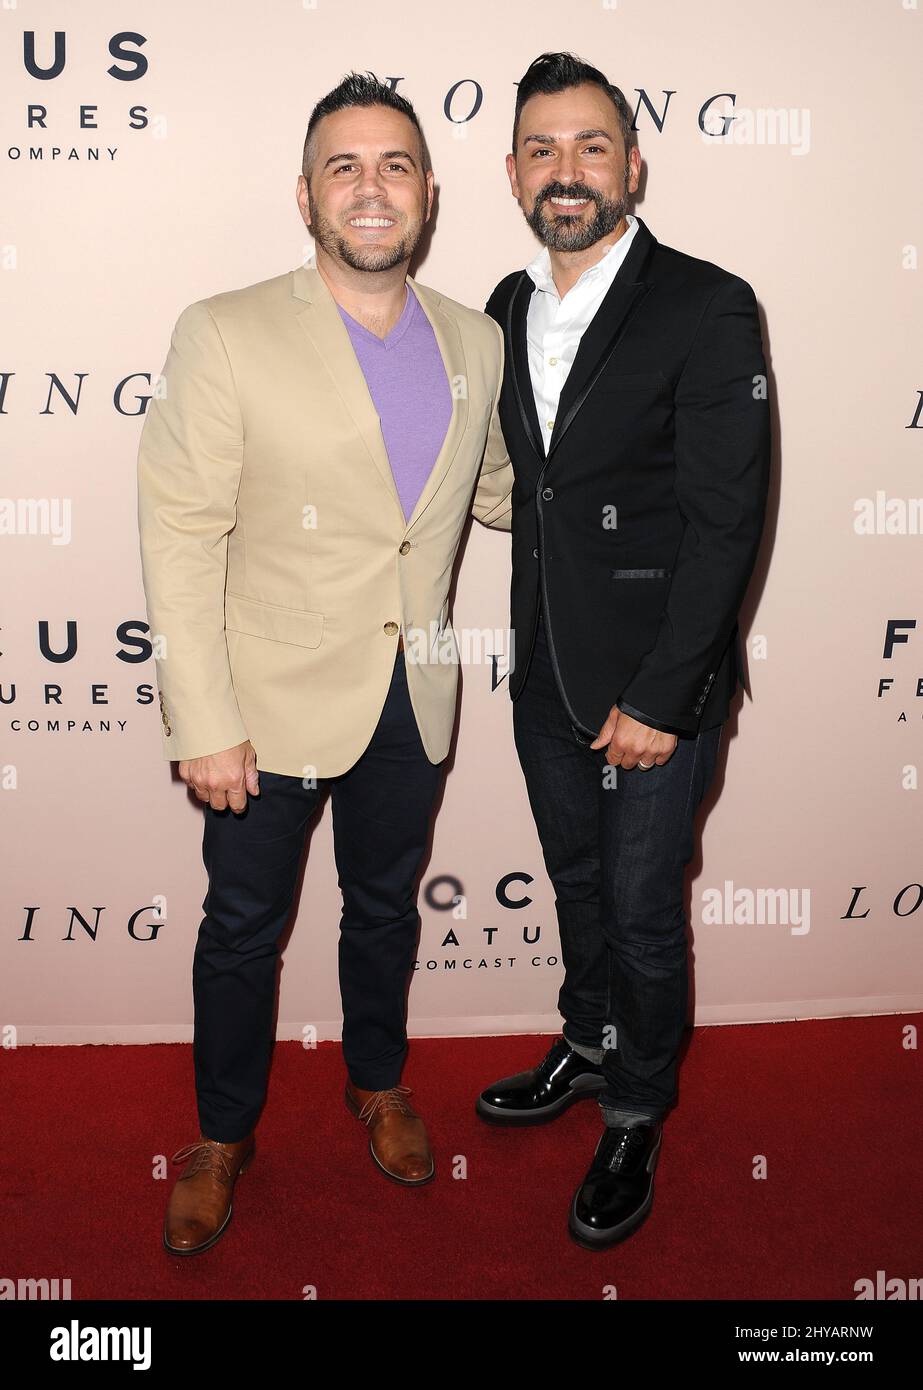 Jeff Zarrillo, Paul Katami poses at the premiere of the film 'Loving' at the Samuel L. Goldwyn Theatre on Thursday, Oct. 20, 2016, in Beverly Hills, Calif Stock Photo